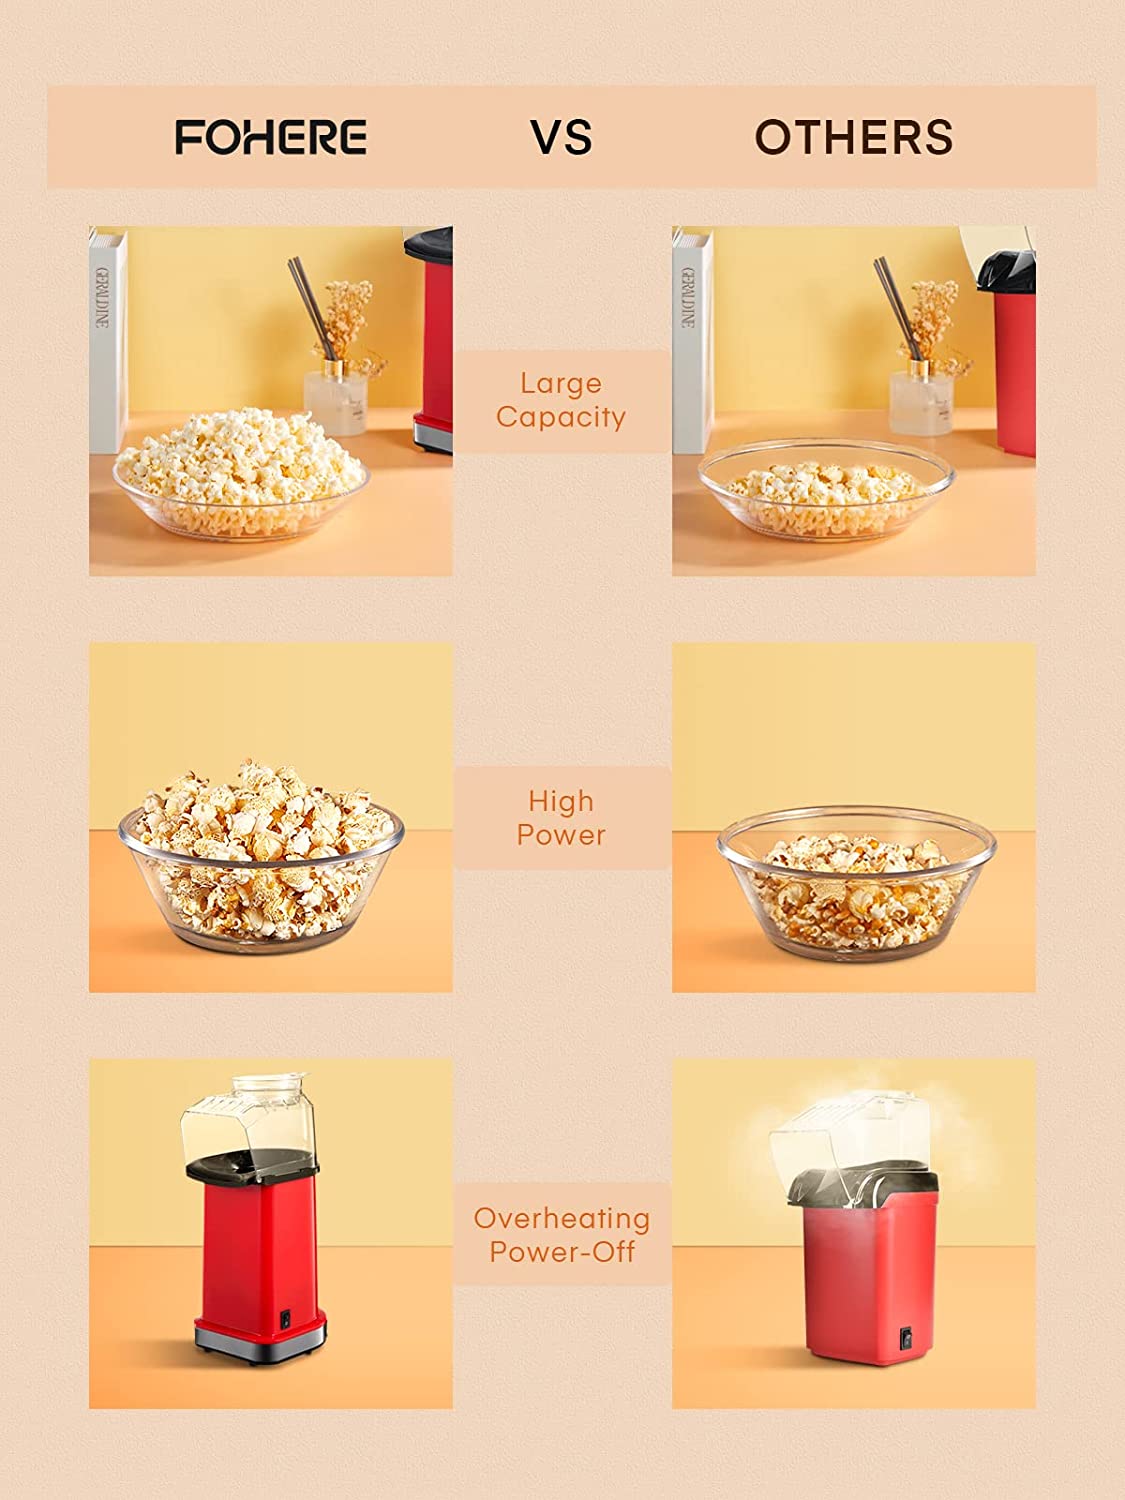 high power, FOHERE 1400W Hot Air Popcorn Maker, 18 Cups/4.5 Quart, Popcorn Popper with Measuring Cup, 2min Fast Popping, Electric Pop Corn Maker, Quick Snack, No Oil Needed